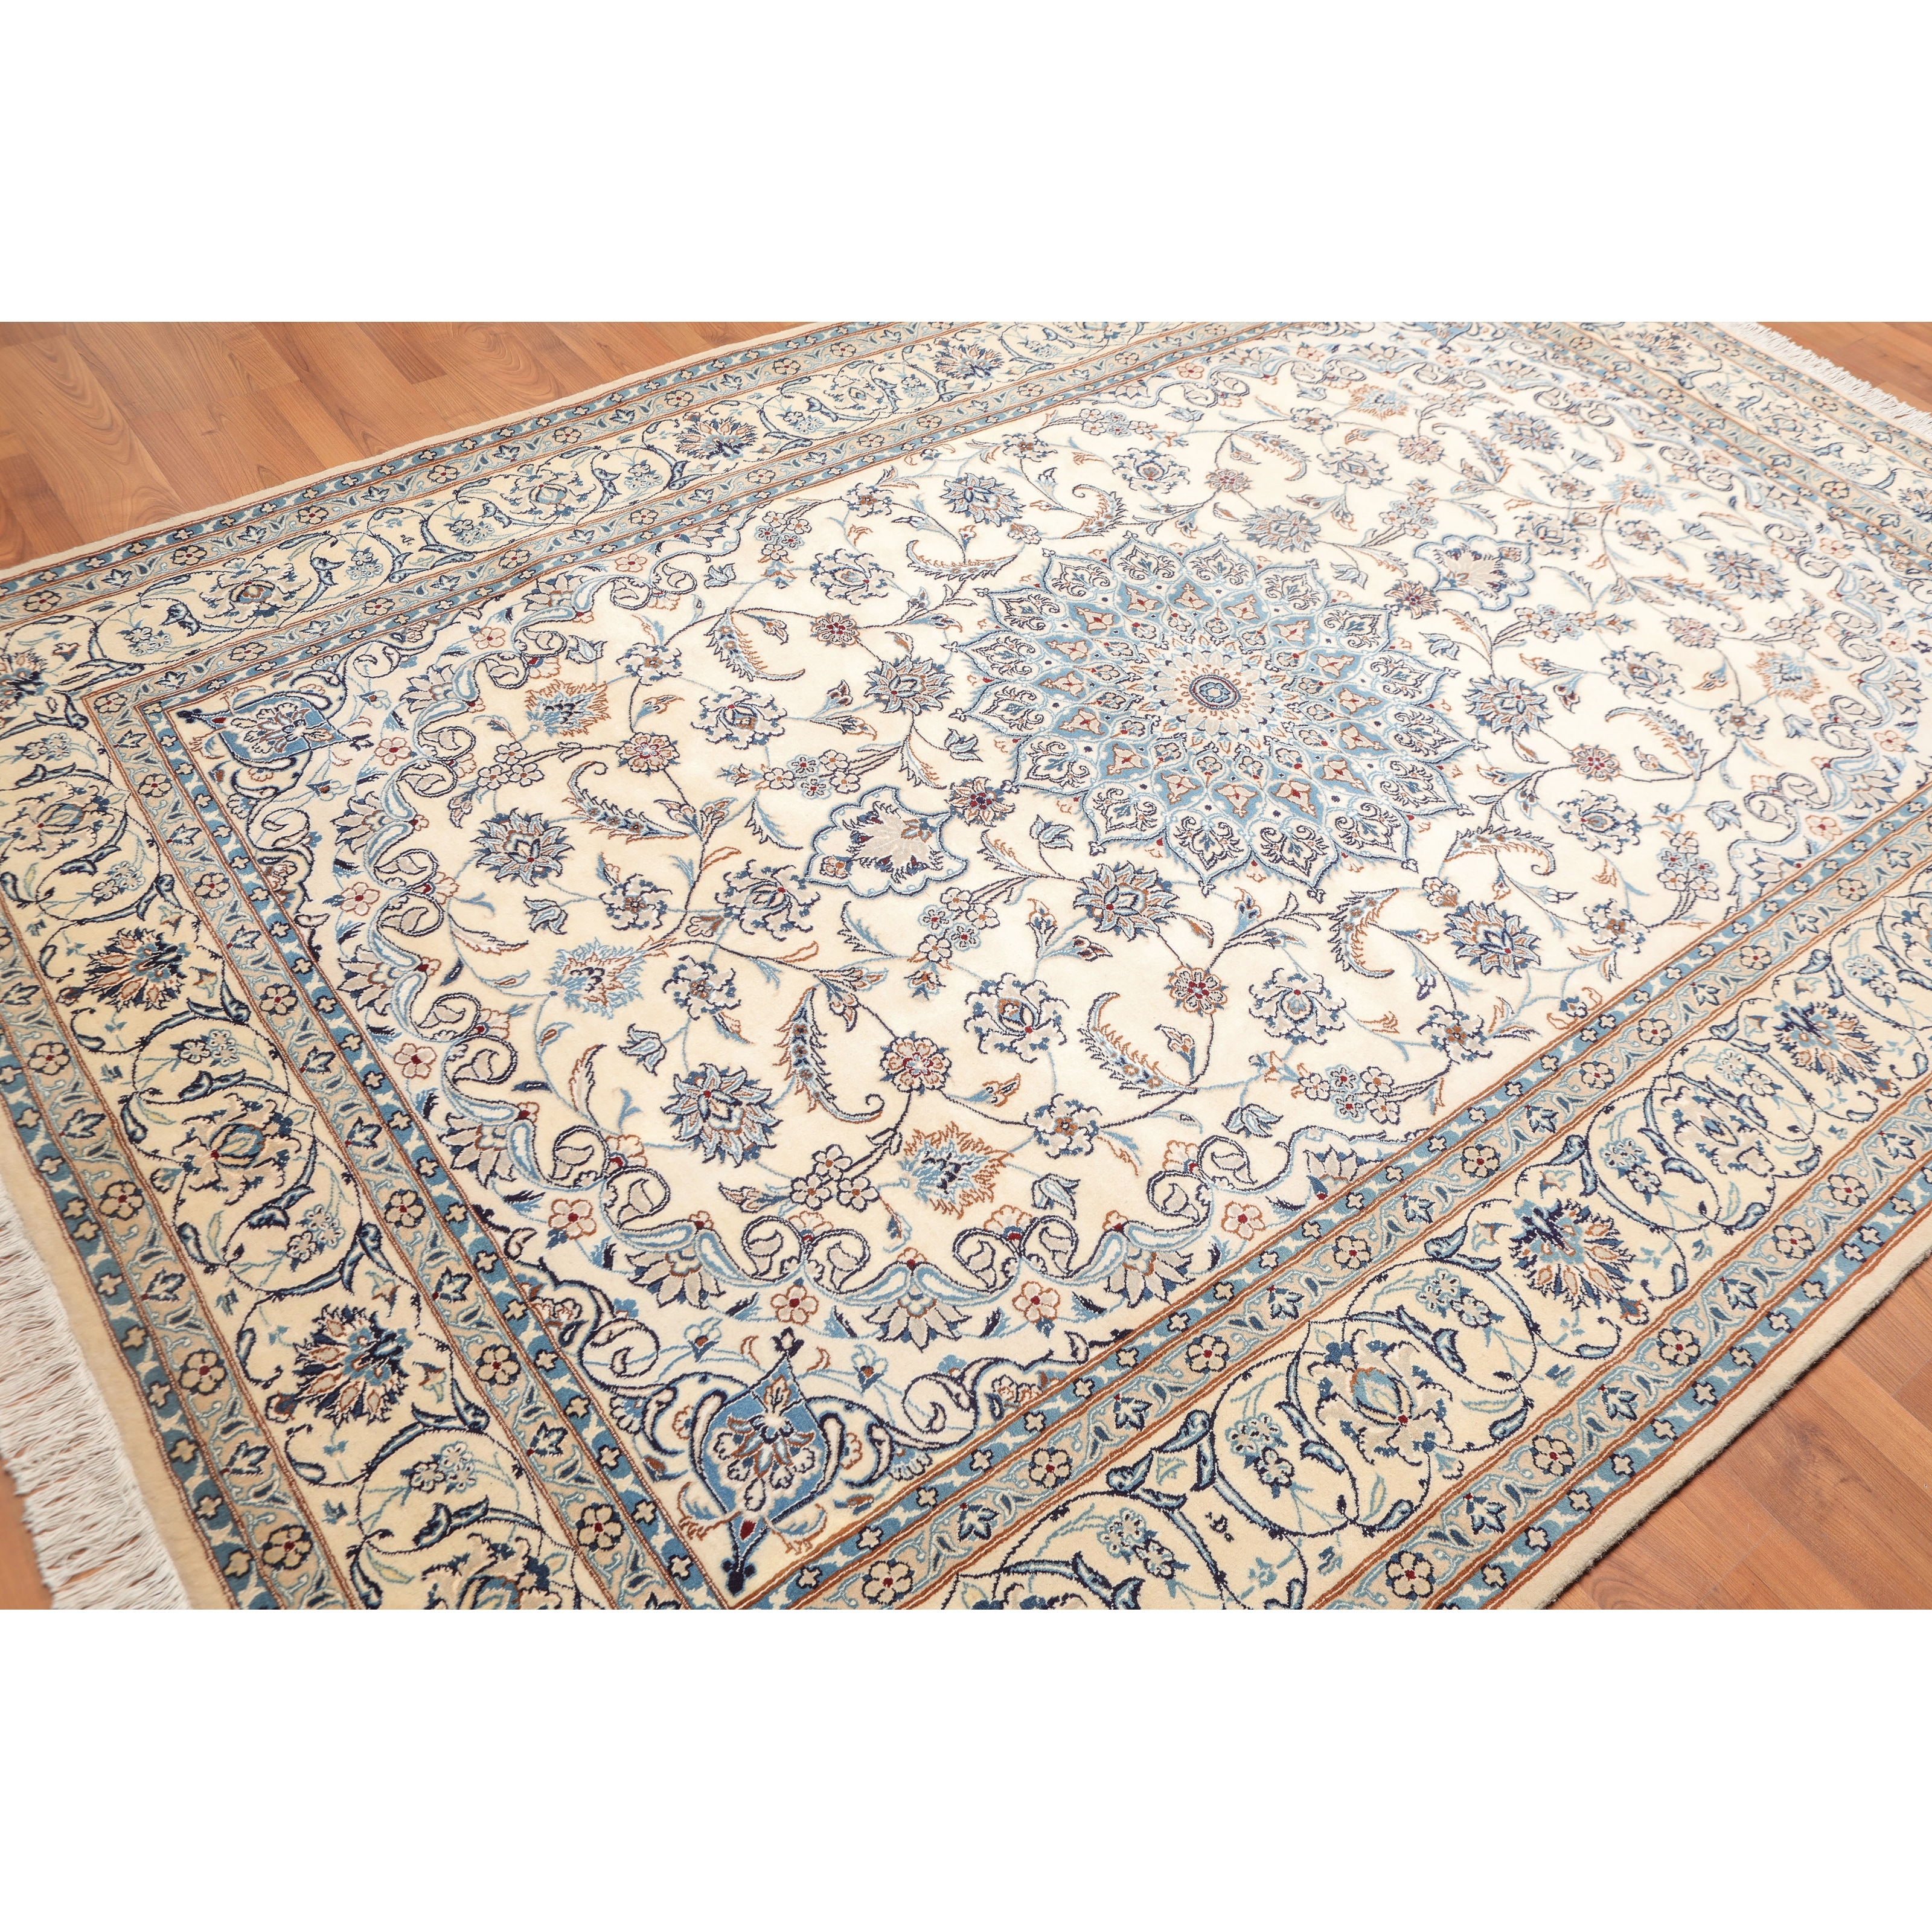 6 Feet by 9 Feet, Ivory Yilong 6'x9' Handmade Wool Silk Rug Traditional Nain Persian Hand Knotted Oriental Carpet WS1428